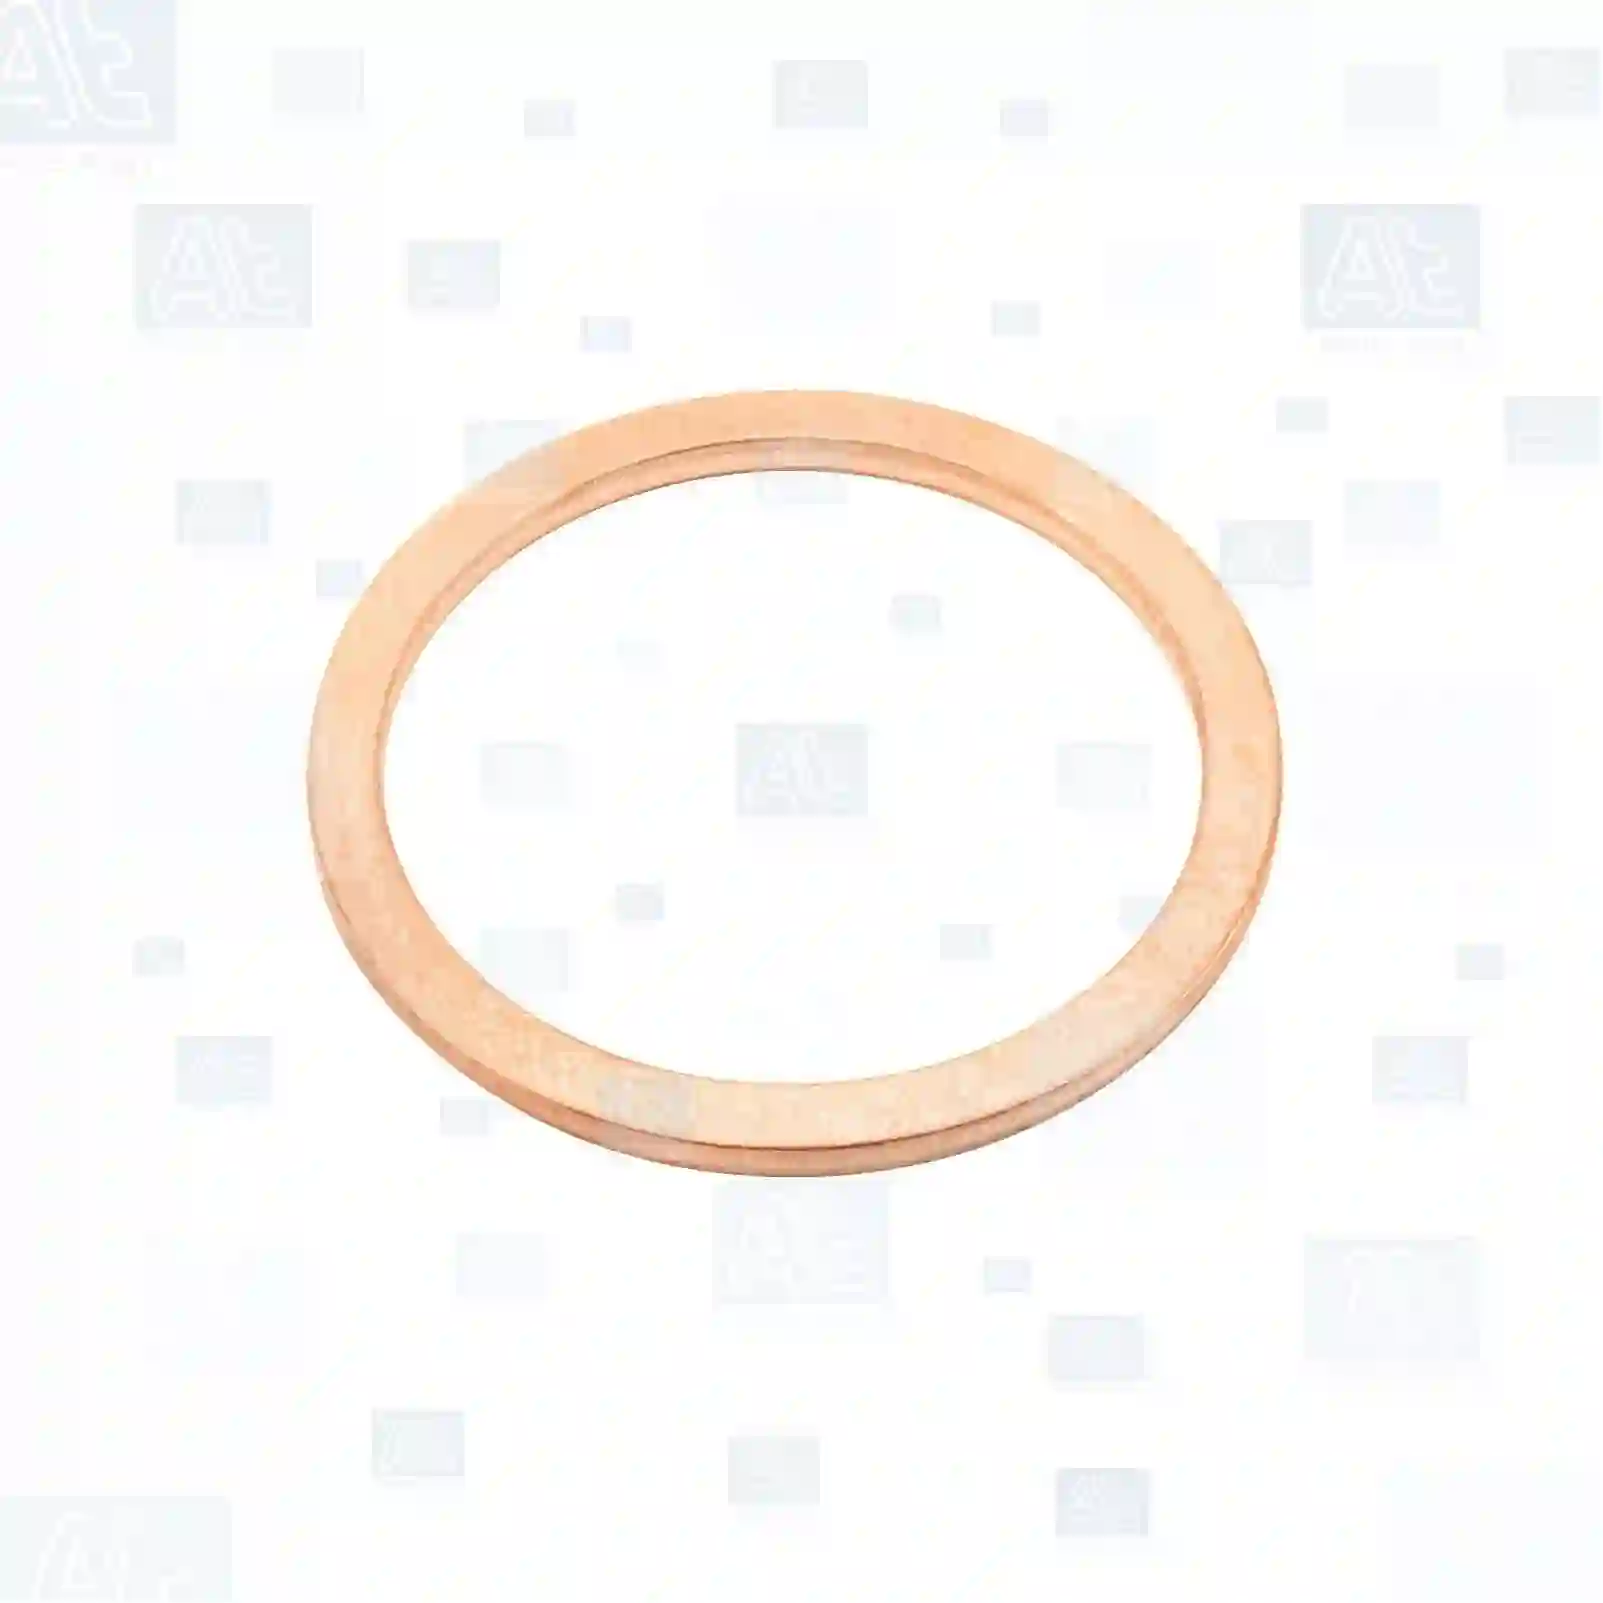 Copper washer, 77725022, 234032243, N0138271, 07119963354, 016484, 0119133, 119133, 01118737, 10263450, 16508460, 60800580, 1669199, 11022571, 0996731019, N007603022102, 717183R1, 10263460, 16508460, 01118737, 06561900718, 000000001085, 007603022102, 01118737, 604920102227, 662261, 016484, 90012301120, 0003143409, 0003143480, 0021323045, 7701039179, 182524, 182525, 192624, 35515, 812418, N0138271, N0138271, 681430, 947627, N0138271, N138271, ZG40223-0008 ||  77725022 At Spare Part | Engine, Accelerator Pedal, Camshaft, Connecting Rod, Crankcase, Crankshaft, Cylinder Head, Engine Suspension Mountings, Exhaust Manifold, Exhaust Gas Recirculation, Filter Kits, Flywheel Housing, General Overhaul Kits, Engine, Intake Manifold, Oil Cleaner, Oil Cooler, Oil Filter, Oil Pump, Oil Sump, Piston & Liner, Sensor & Switch, Timing Case, Turbocharger, Cooling System, Belt Tensioner, Coolant Filter, Coolant Pipe, Corrosion Prevention Agent, Drive, Expansion Tank, Fan, Intercooler, Monitors & Gauges, Radiator, Thermostat, V-Belt / Timing belt, Water Pump, Fuel System, Electronical Injector Unit, Feed Pump, Fuel Filter, cpl., Fuel Gauge Sender,  Fuel Line, Fuel Pump, Fuel Tank, Injection Line Kit, Injection Pump, Exhaust System, Clutch & Pedal, Gearbox, Propeller Shaft, Axles, Brake System, Hubs & Wheels, Suspension, Leaf Spring, Universal Parts / Accessories, Steering, Electrical System, Cabin Copper washer, 77725022, 234032243, N0138271, 07119963354, 016484, 0119133, 119133, 01118737, 10263450, 16508460, 60800580, 1669199, 11022571, 0996731019, N007603022102, 717183R1, 10263460, 16508460, 01118737, 06561900718, 000000001085, 007603022102, 01118737, 604920102227, 662261, 016484, 90012301120, 0003143409, 0003143480, 0021323045, 7701039179, 182524, 182525, 192624, 35515, 812418, N0138271, N0138271, 681430, 947627, N0138271, N138271, ZG40223-0008 ||  77725022 At Spare Part | Engine, Accelerator Pedal, Camshaft, Connecting Rod, Crankcase, Crankshaft, Cylinder Head, Engine Suspension Mountings, Exhaust Manifold, Exhaust Gas Recirculation, Filter Kits, Flywheel Housing, General Overhaul Kits, Engine, Intake Manifold, Oil Cleaner, Oil Cooler, Oil Filter, Oil Pump, Oil Sump, Piston & Liner, Sensor & Switch, Timing Case, Turbocharger, Cooling System, Belt Tensioner, Coolant Filter, Coolant Pipe, Corrosion Prevention Agent, Drive, Expansion Tank, Fan, Intercooler, Monitors & Gauges, Radiator, Thermostat, V-Belt / Timing belt, Water Pump, Fuel System, Electronical Injector Unit, Feed Pump, Fuel Filter, cpl., Fuel Gauge Sender,  Fuel Line, Fuel Pump, Fuel Tank, Injection Line Kit, Injection Pump, Exhaust System, Clutch & Pedal, Gearbox, Propeller Shaft, Axles, Brake System, Hubs & Wheels, Suspension, Leaf Spring, Universal Parts / Accessories, Steering, Electrical System, Cabin